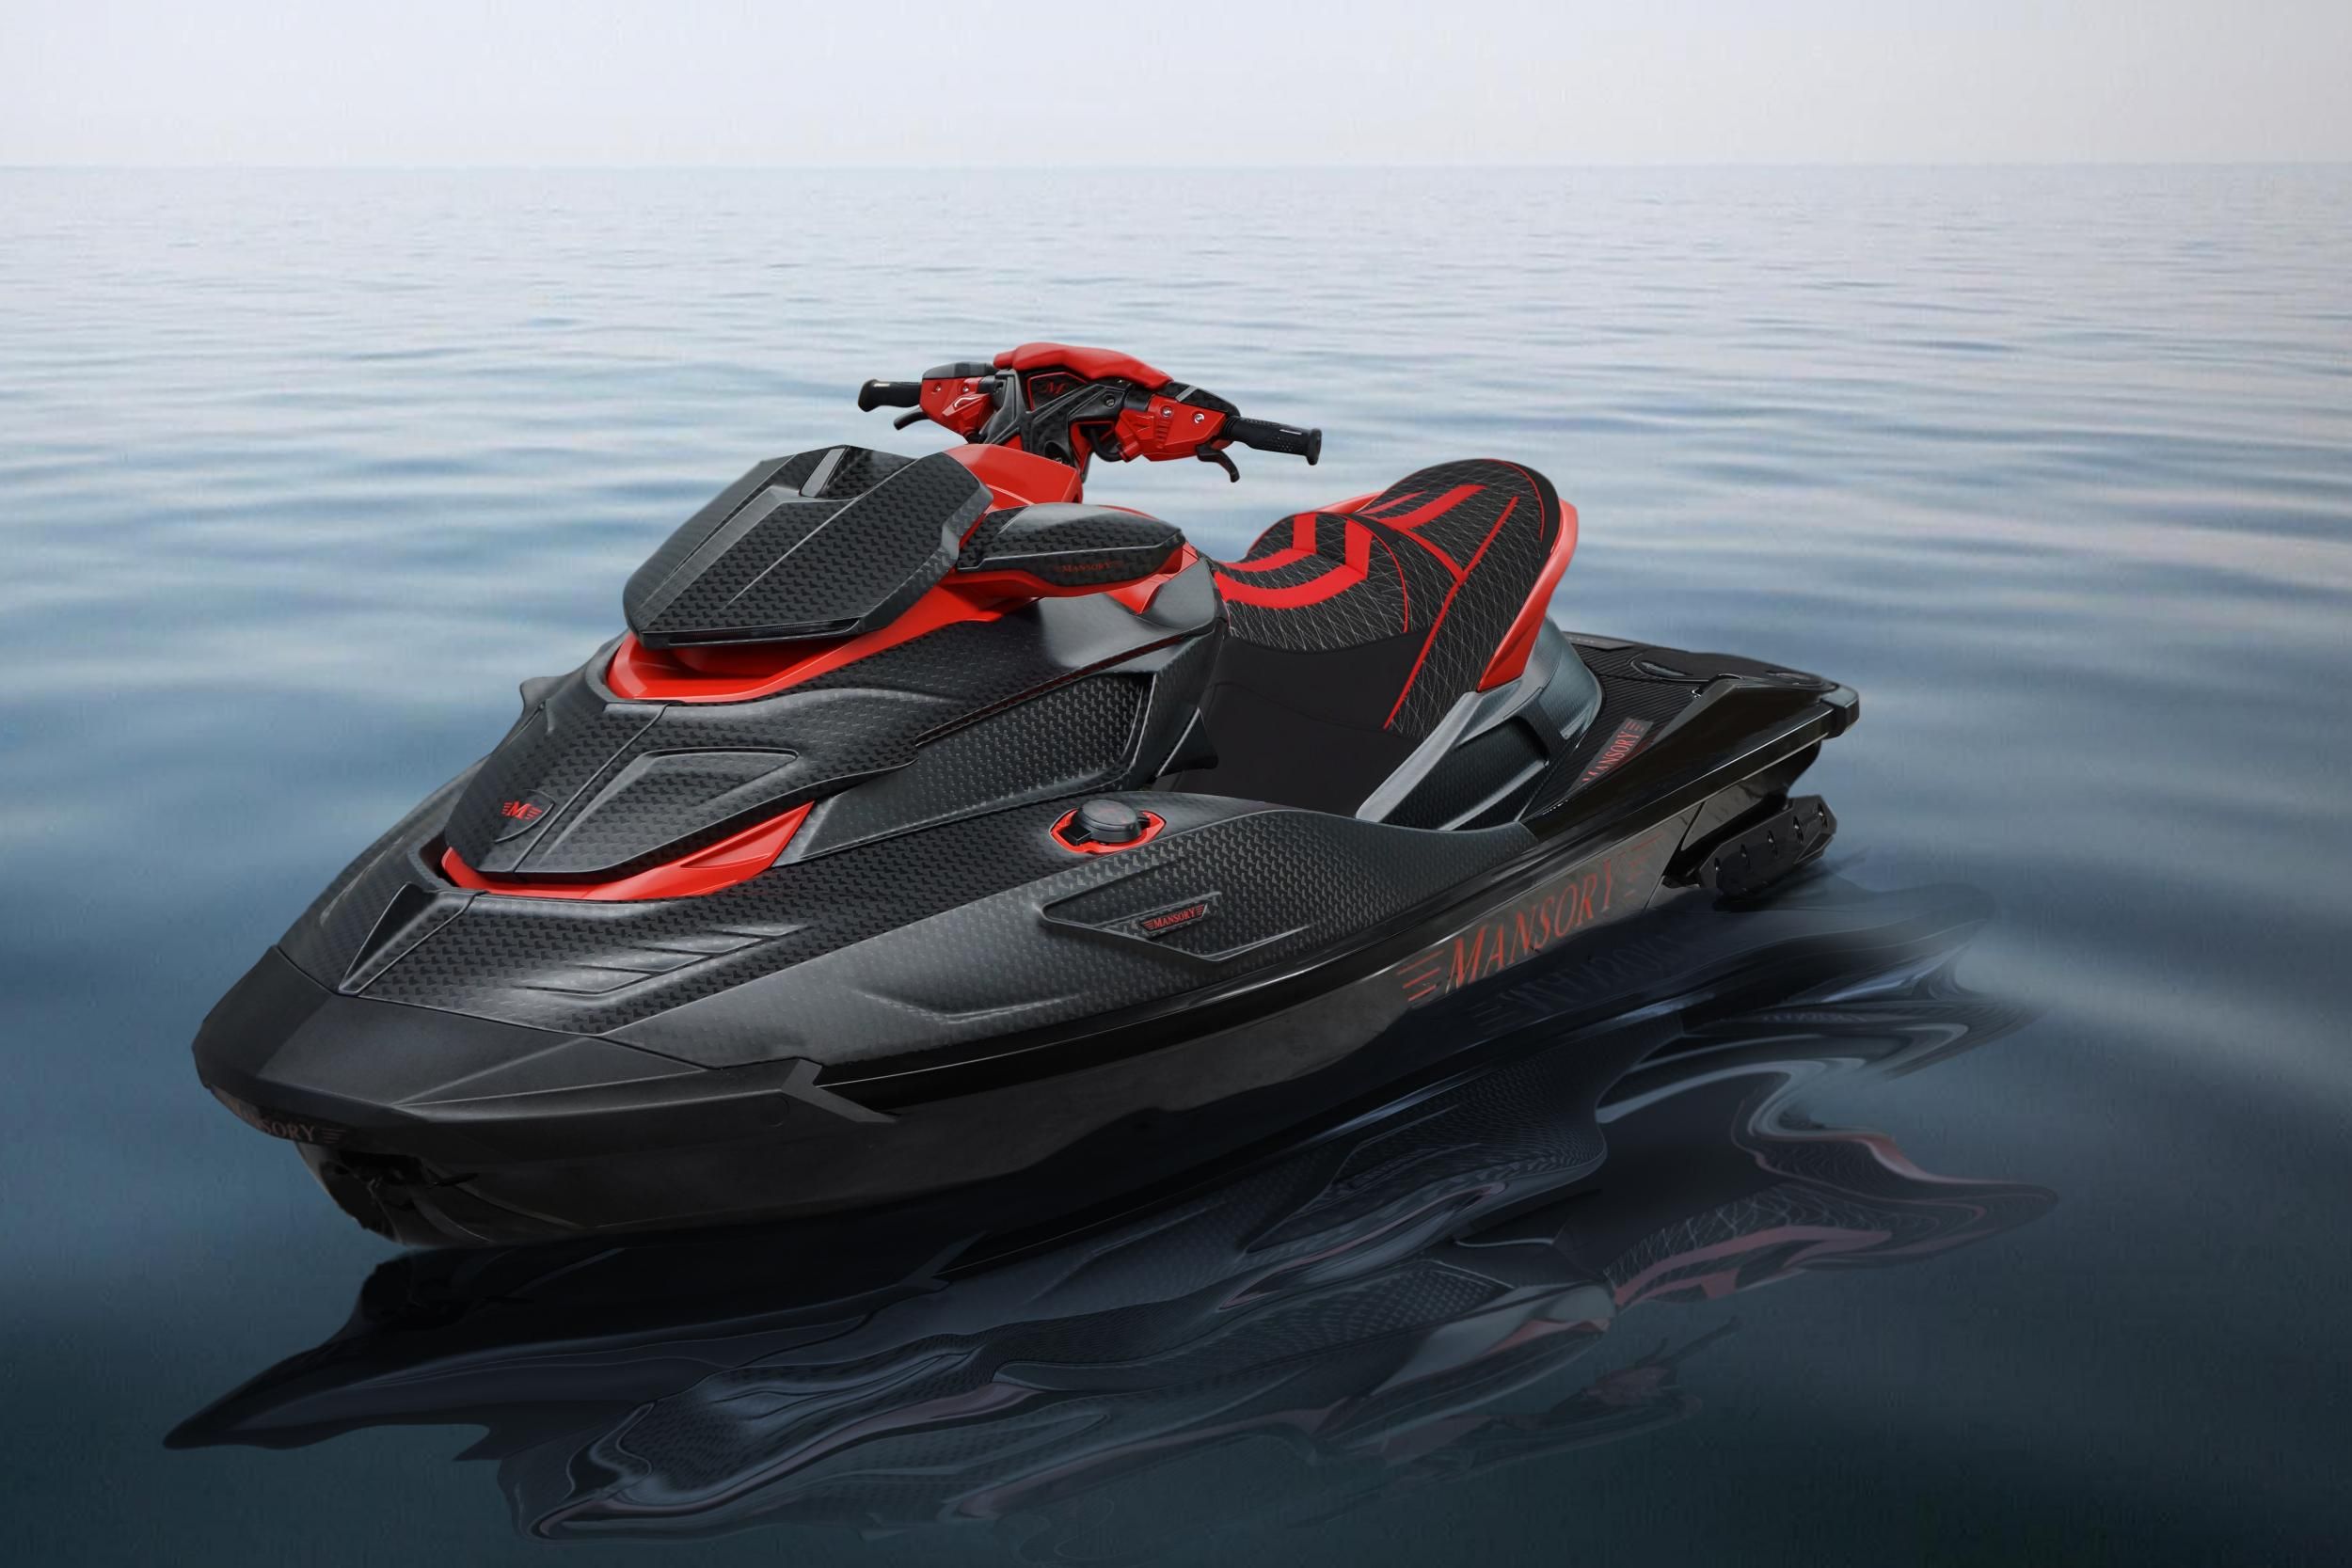 The Evolution of Personal Watercraft: From Stand-Up to Sit-Down